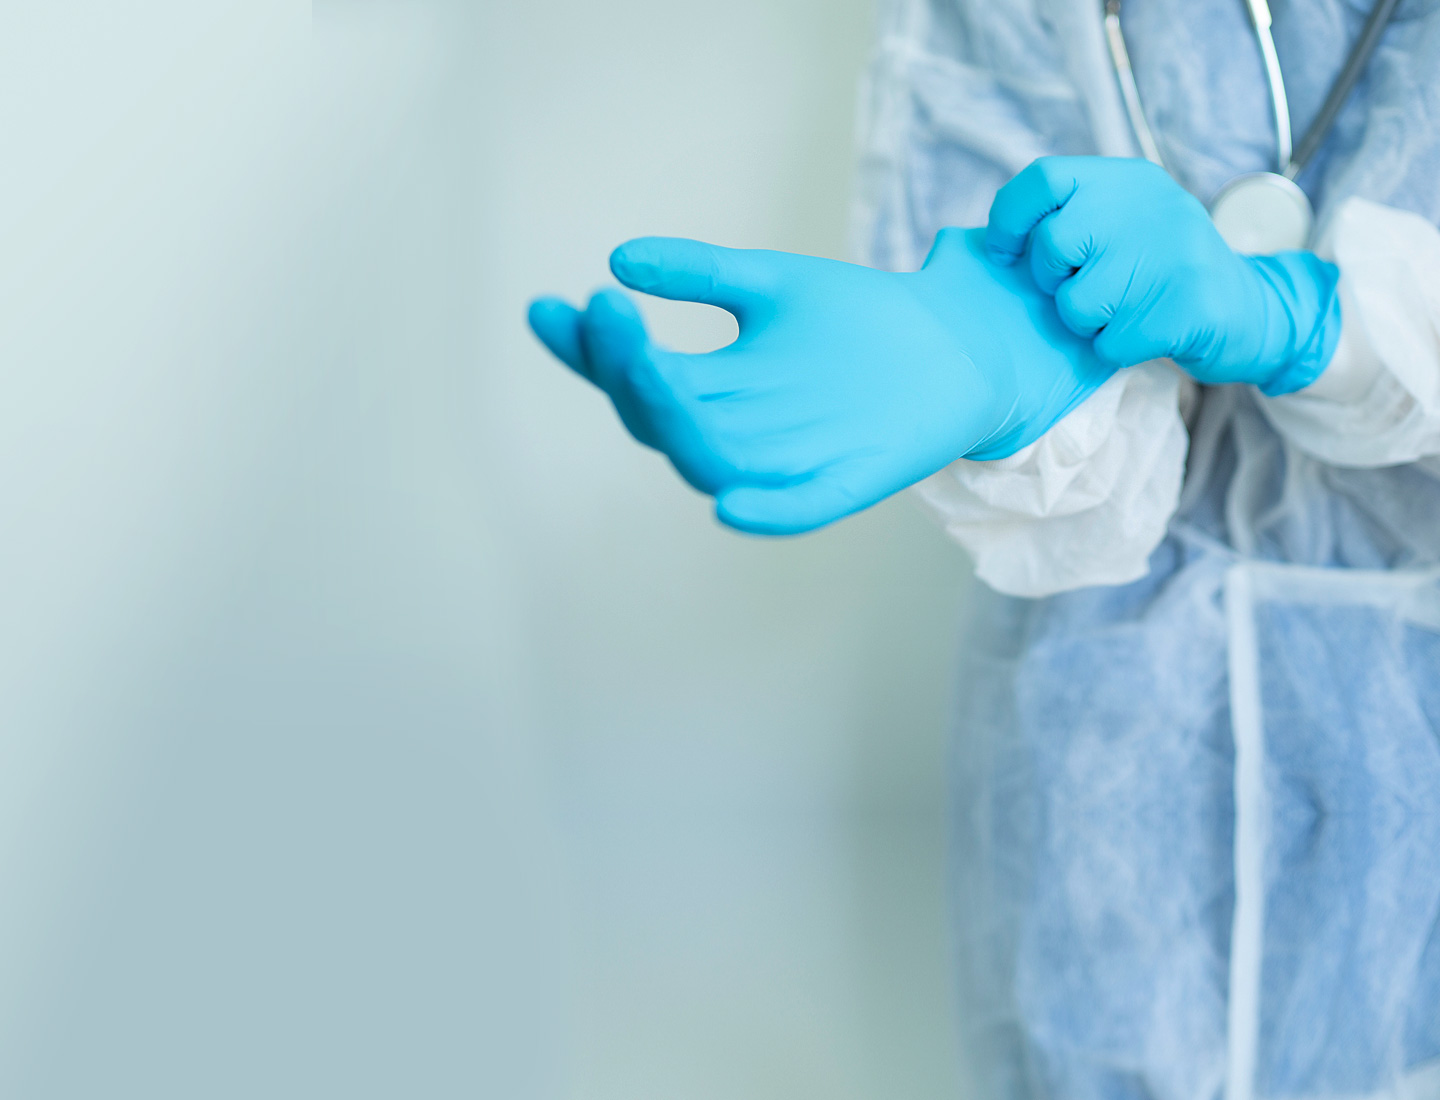 Nurse in full protective clothing putting on surgical gloves